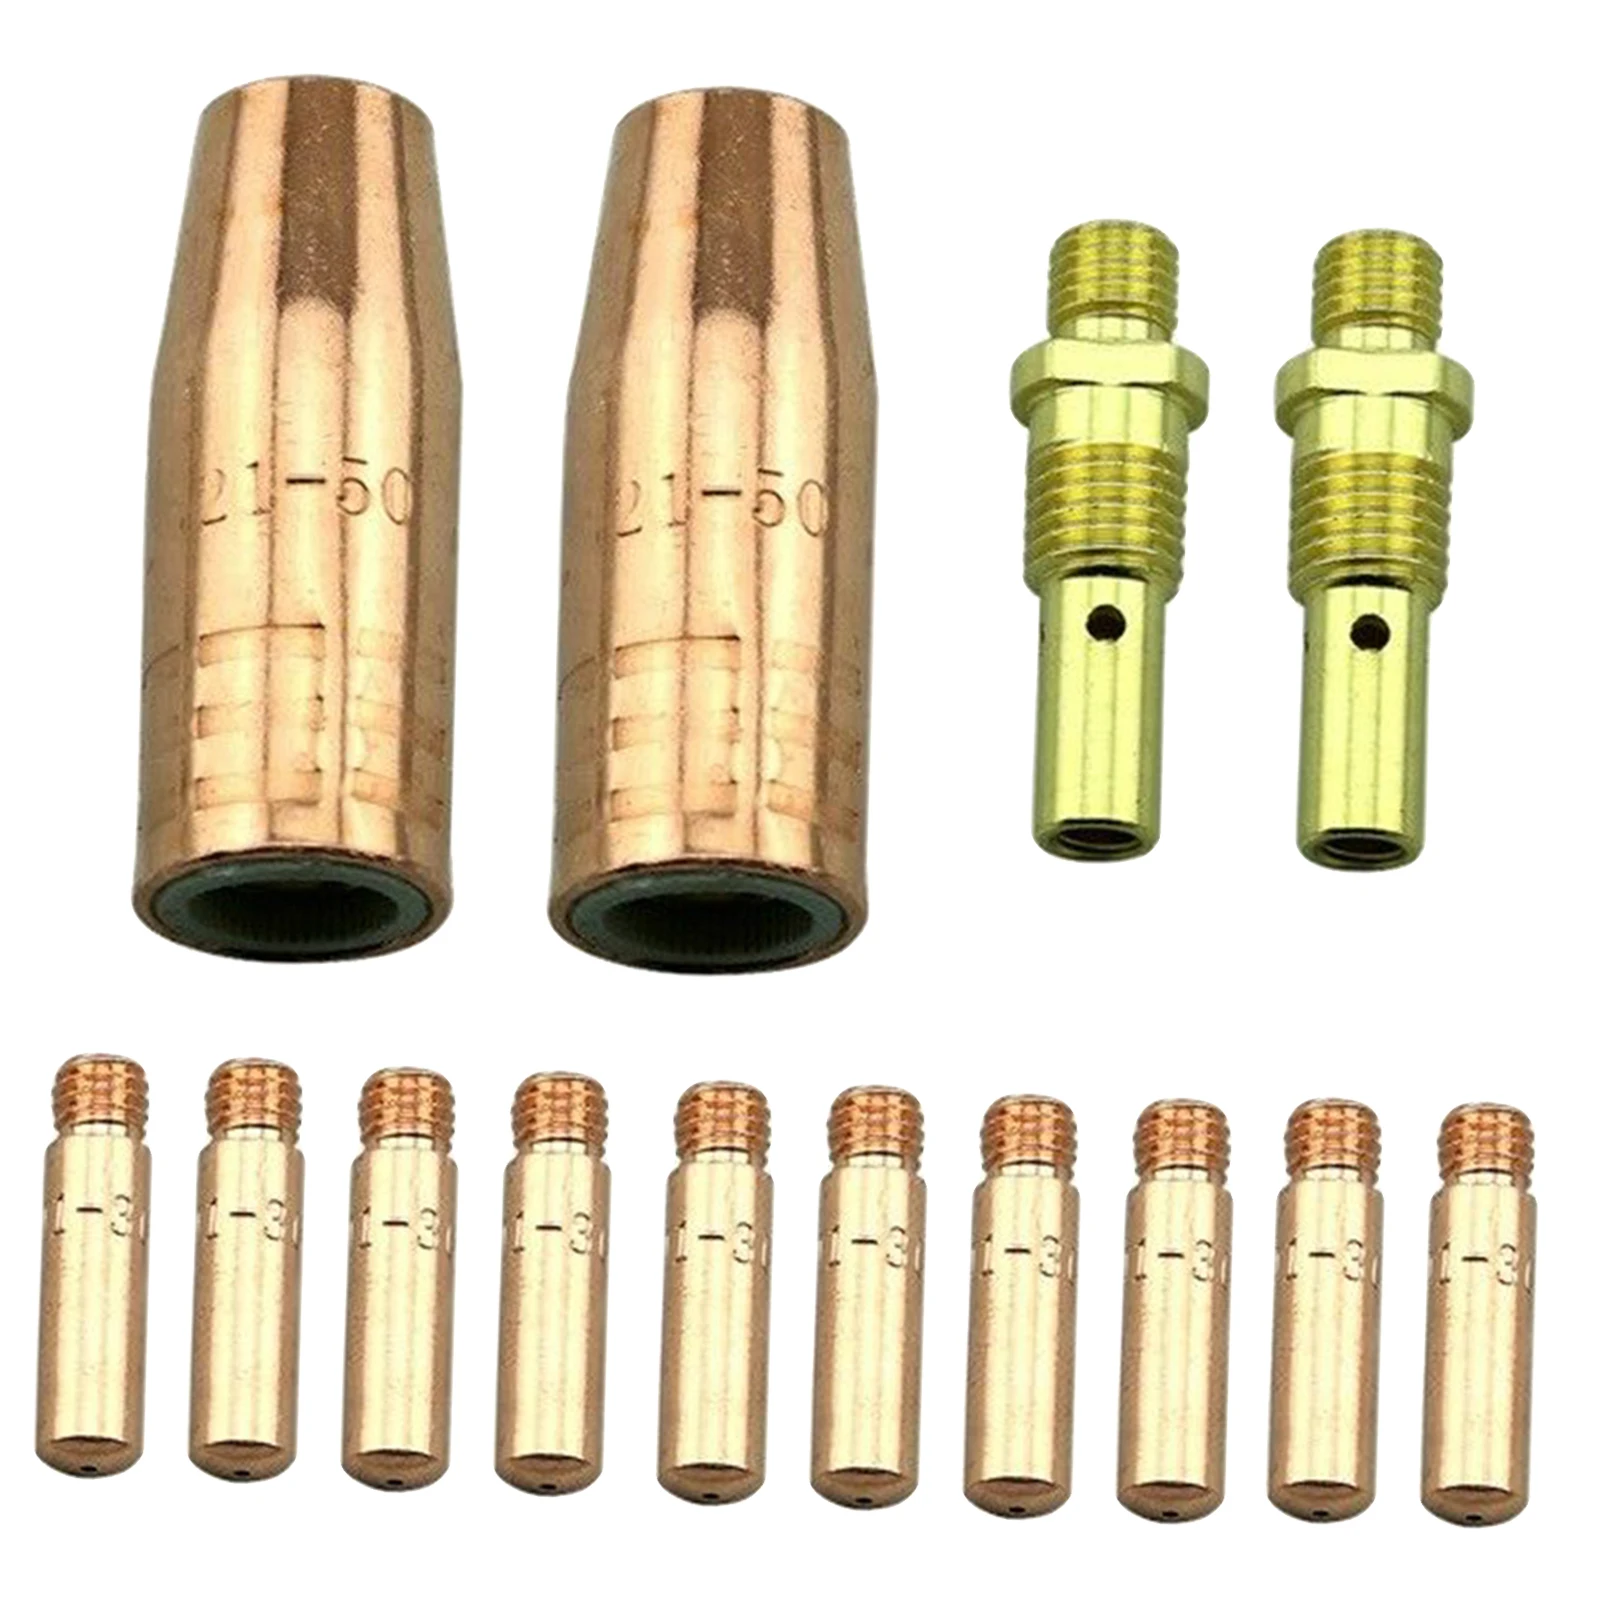 MIG Welding Nozzle Terminal Accessory Welding for Mini/#1 Protection Tip Nozzle Welders Welding Torch Accessories Kit